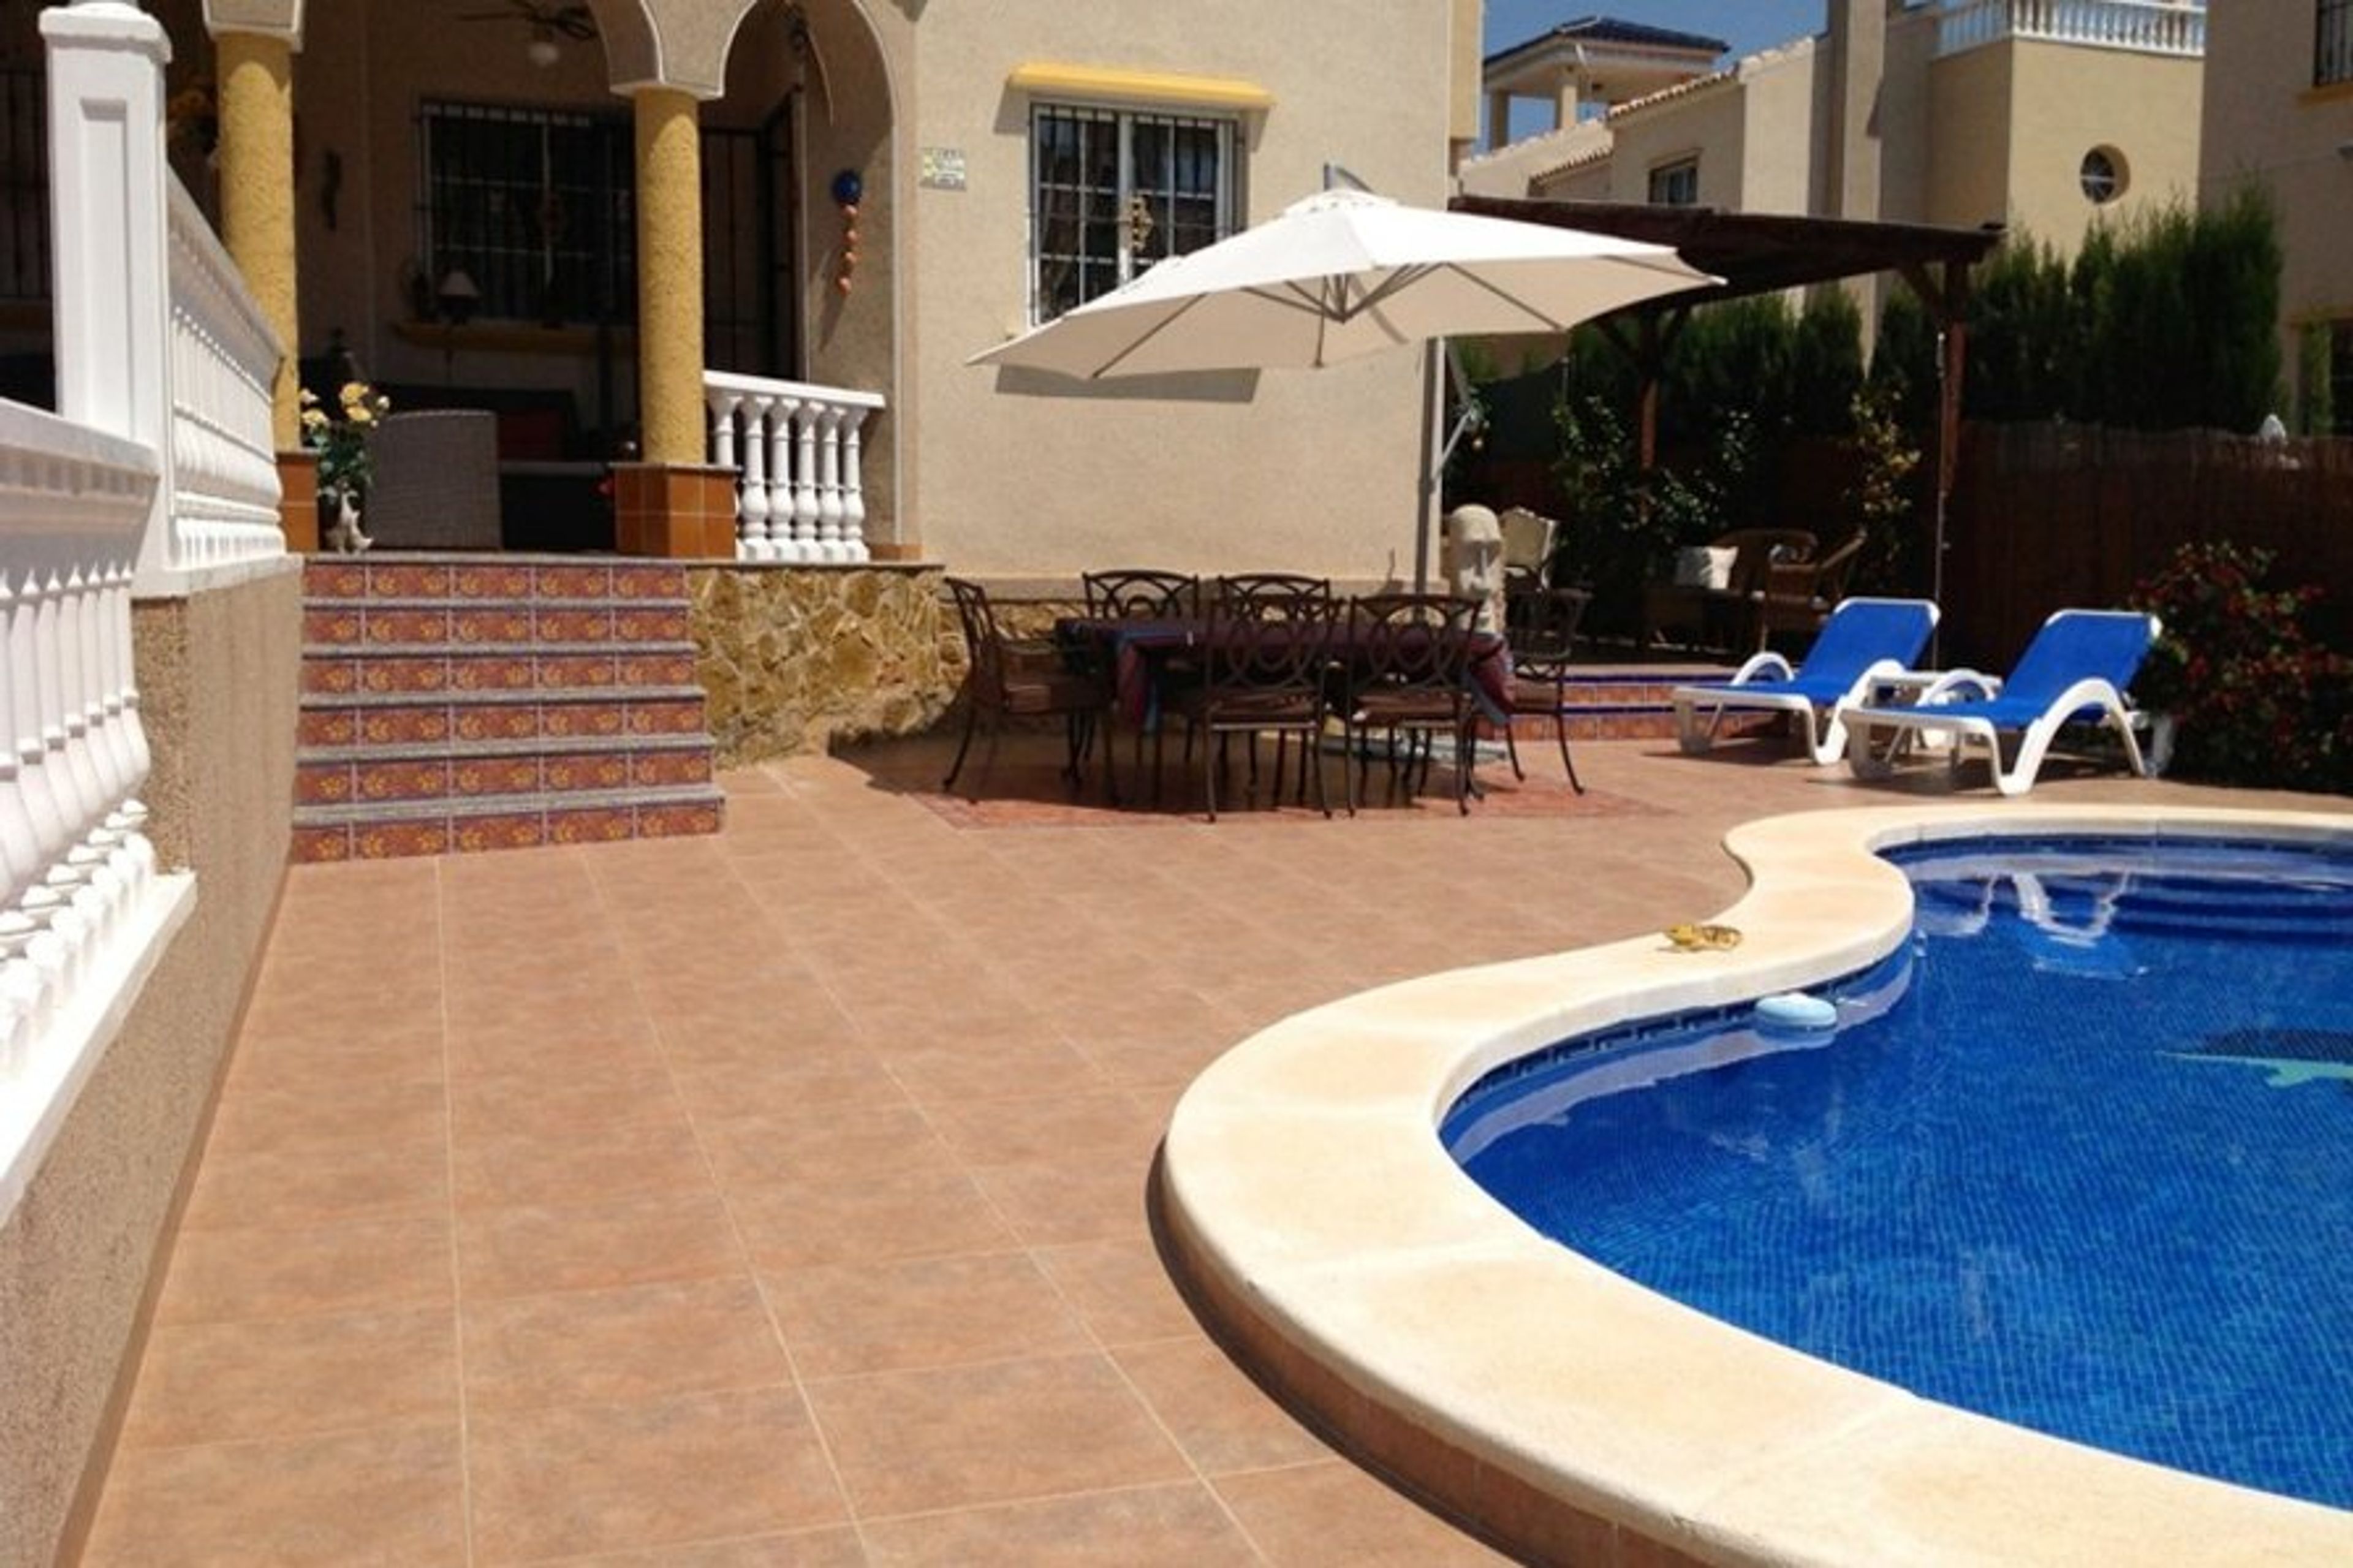 Front entrance to villa and pool and patio area.